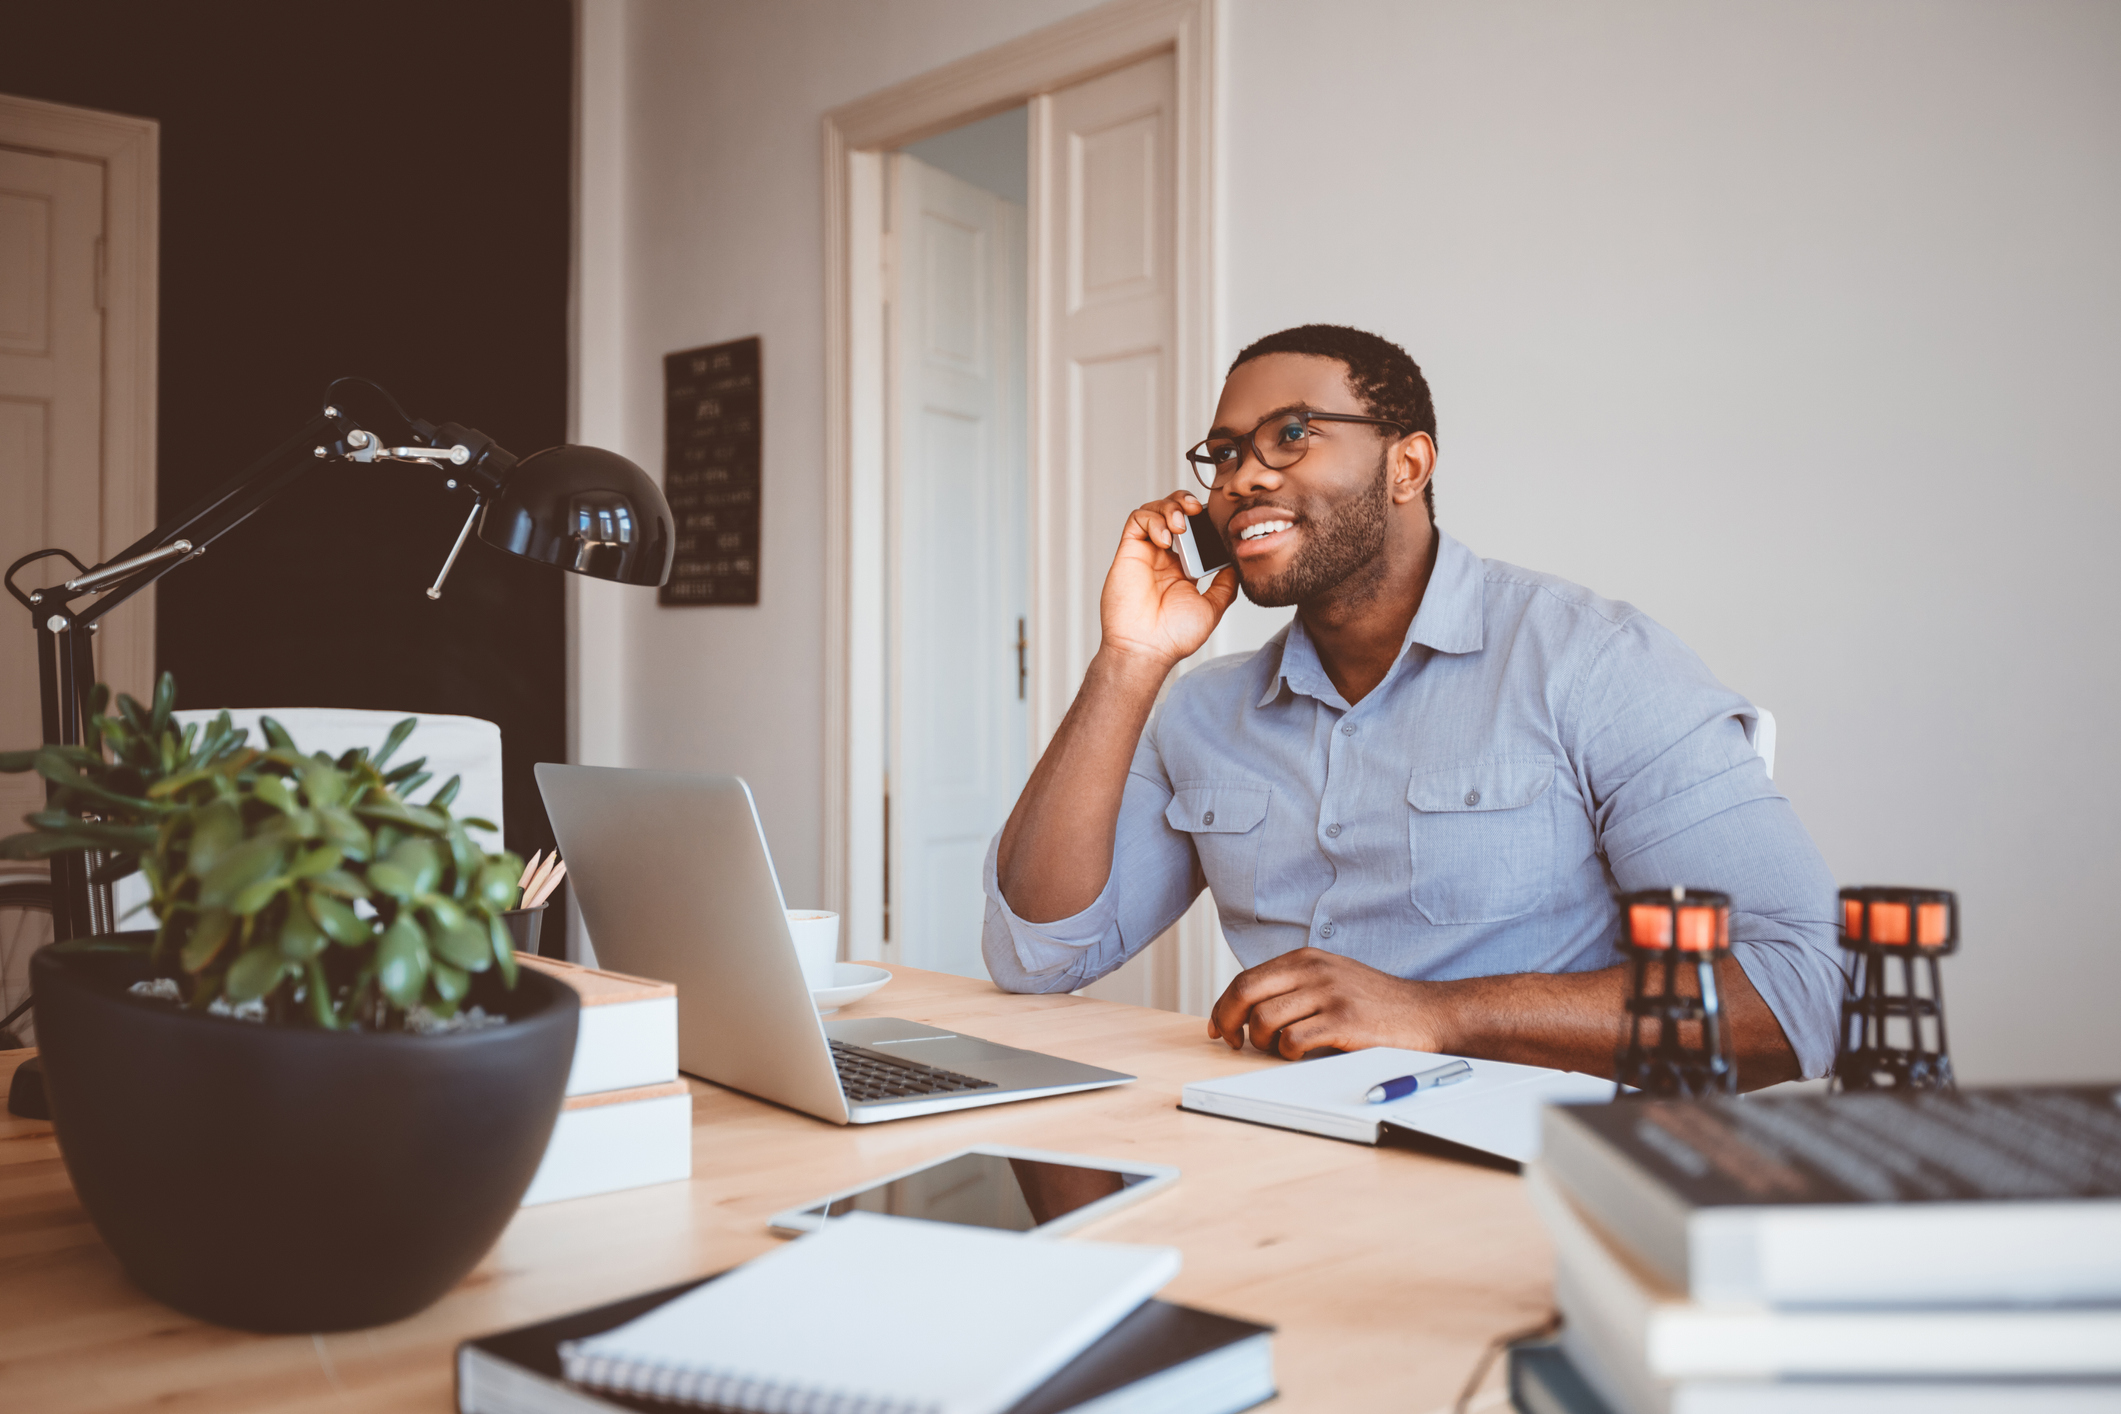 5 Tips to Make Cold Calls Work